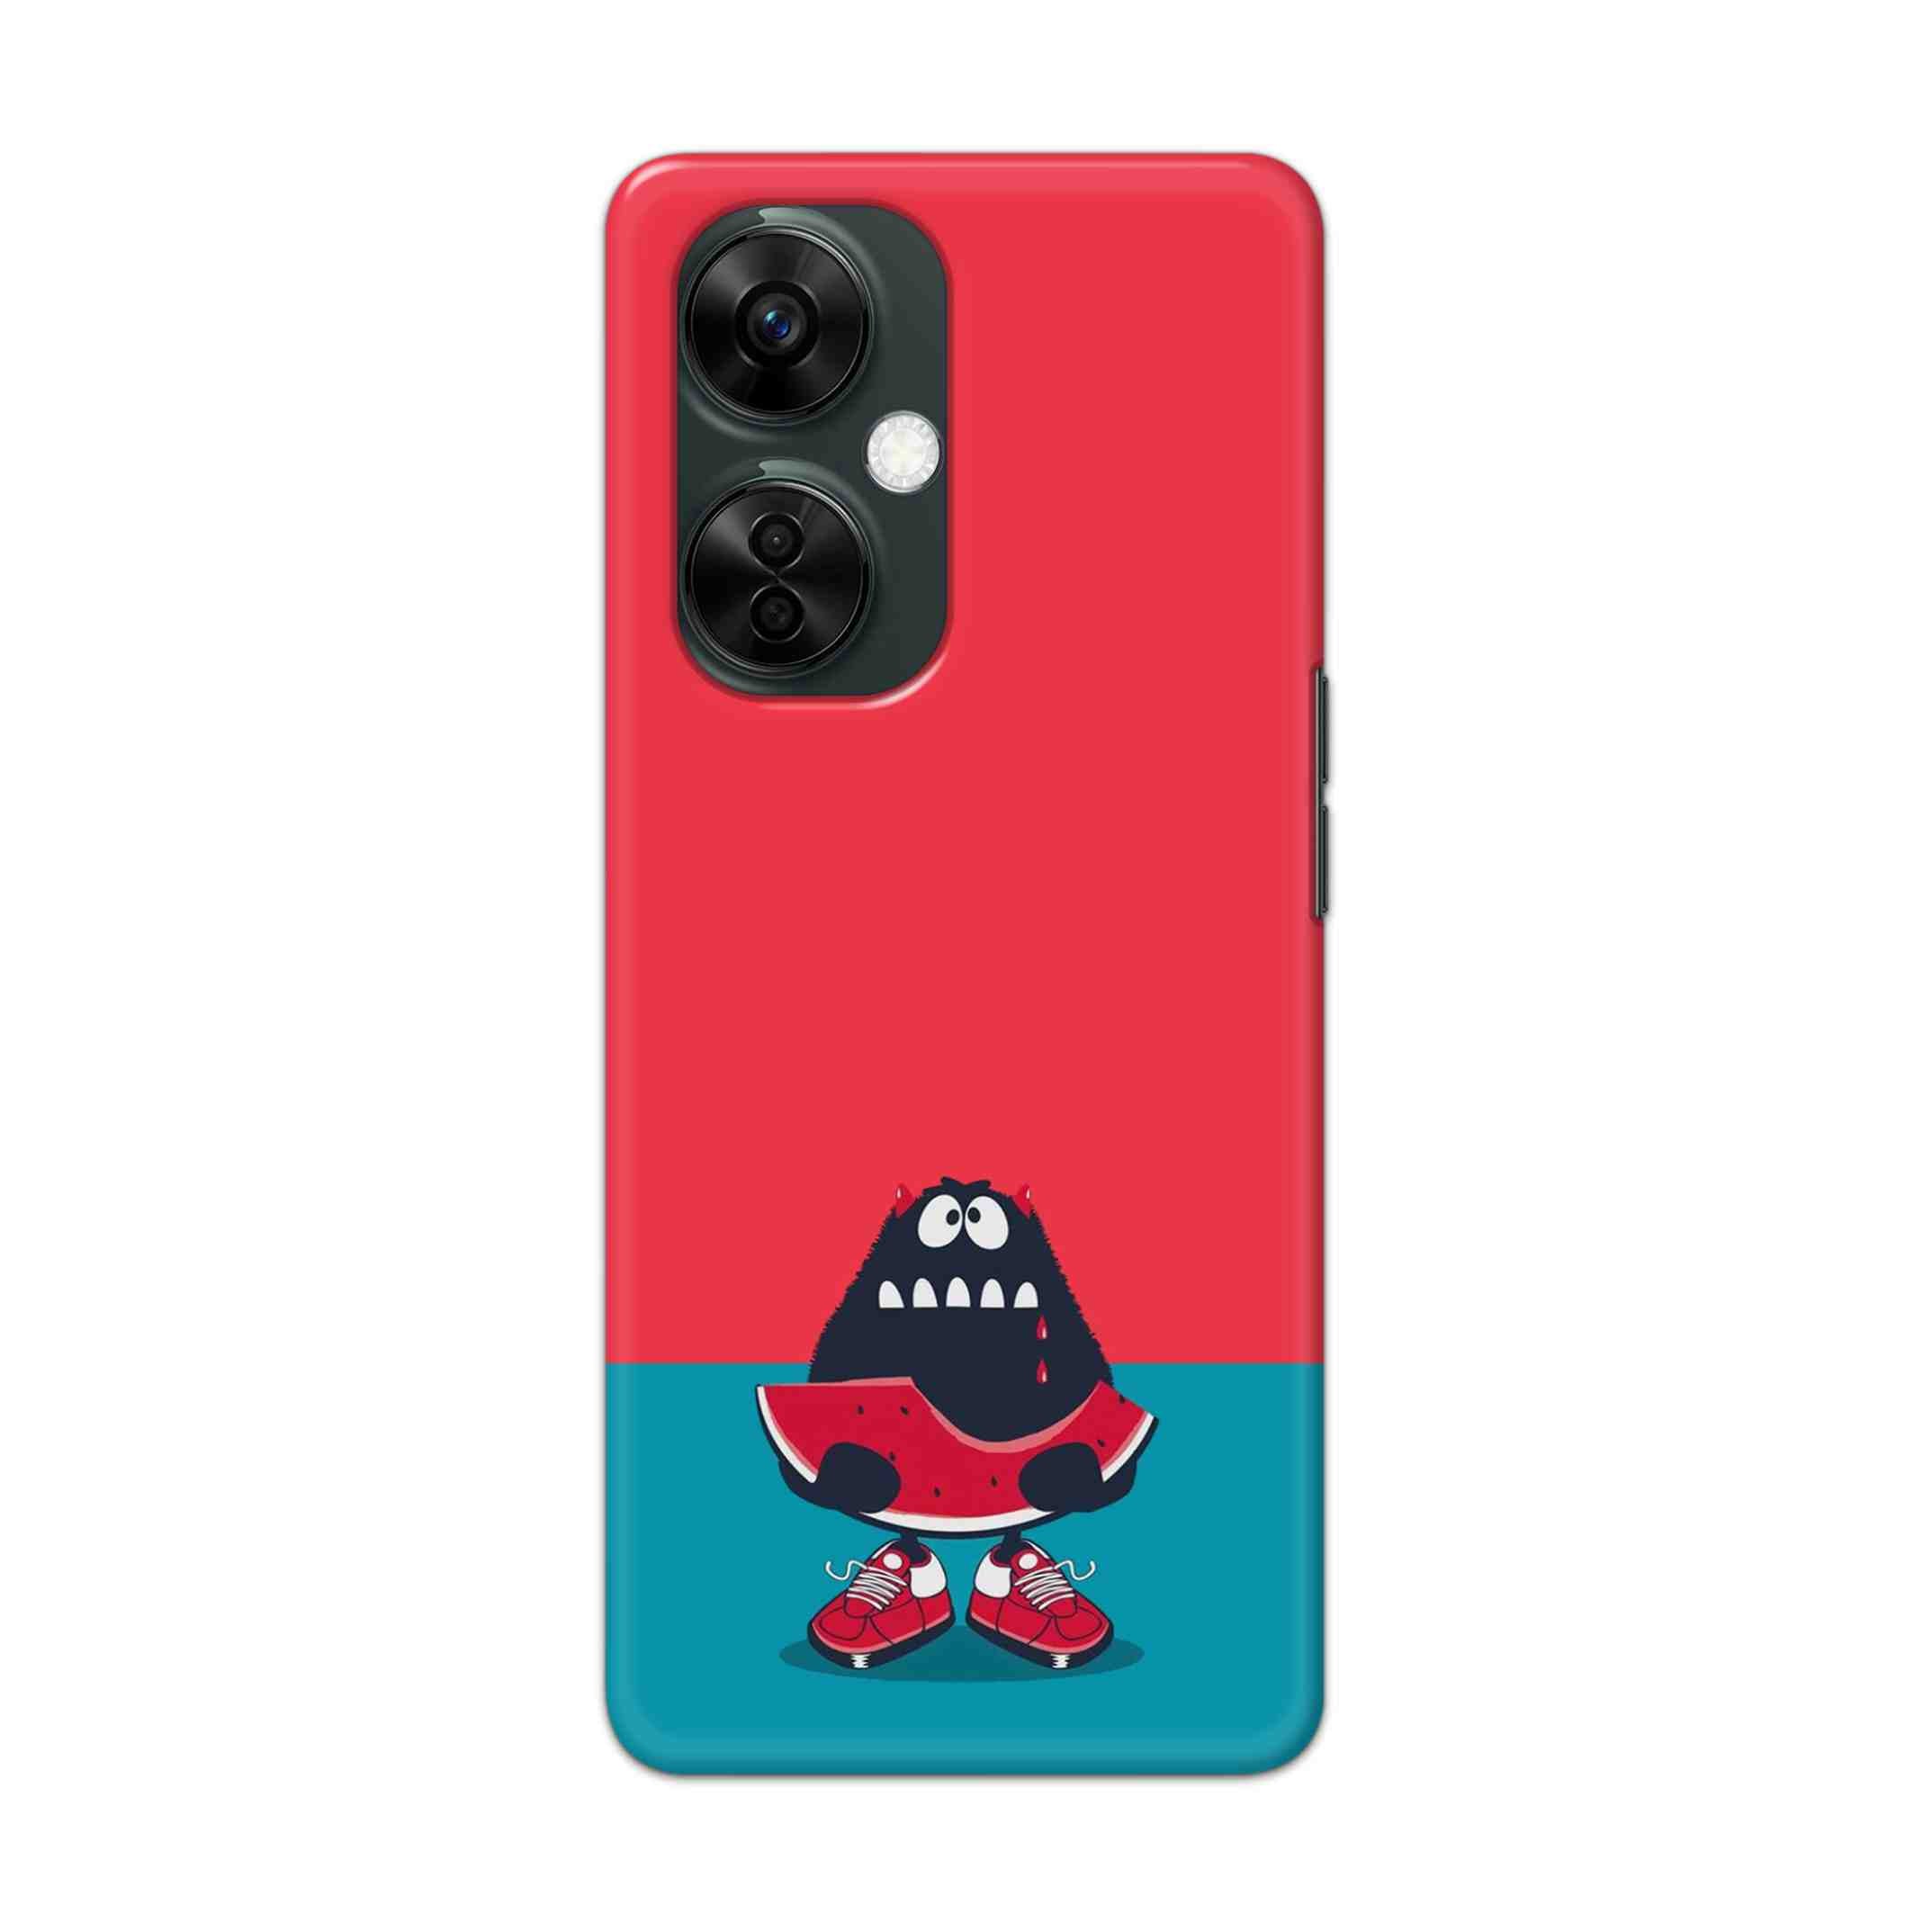 Buy Watermelon Hard Back Mobile Phone Case Cover For Oneplus Nord CE 3 Lite Online